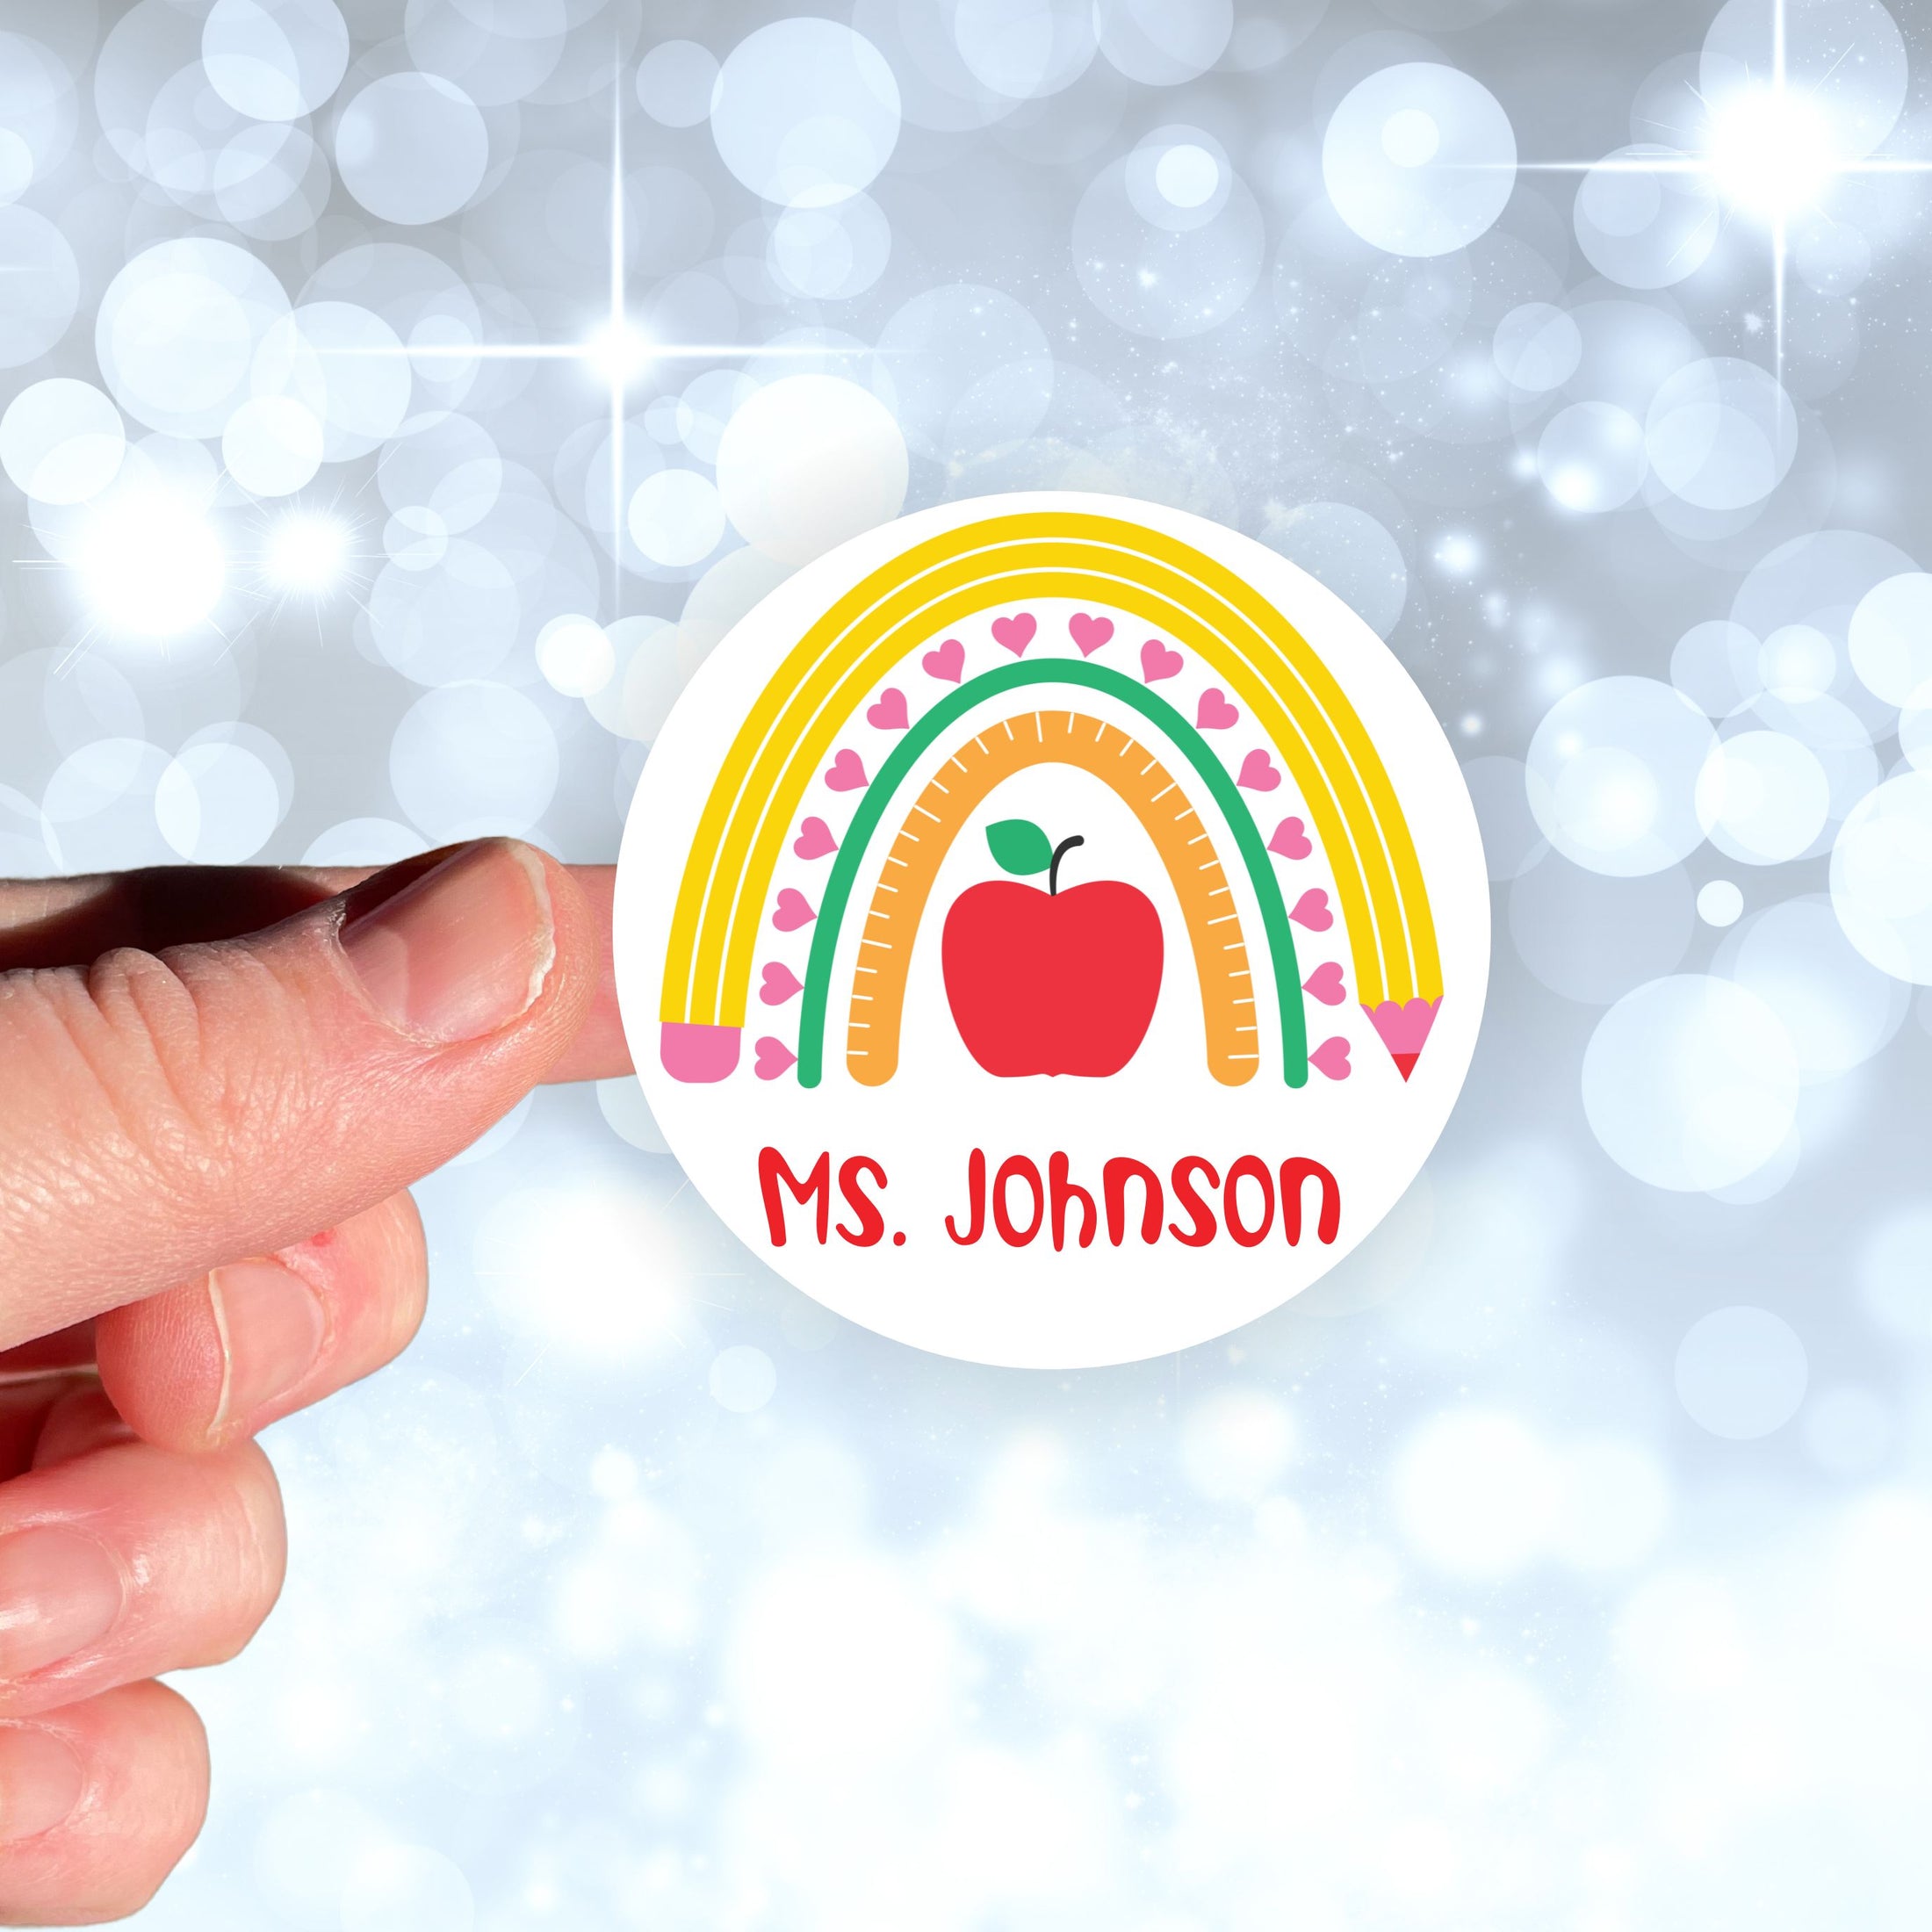 This image shows a hand holding the personalized school sticker.